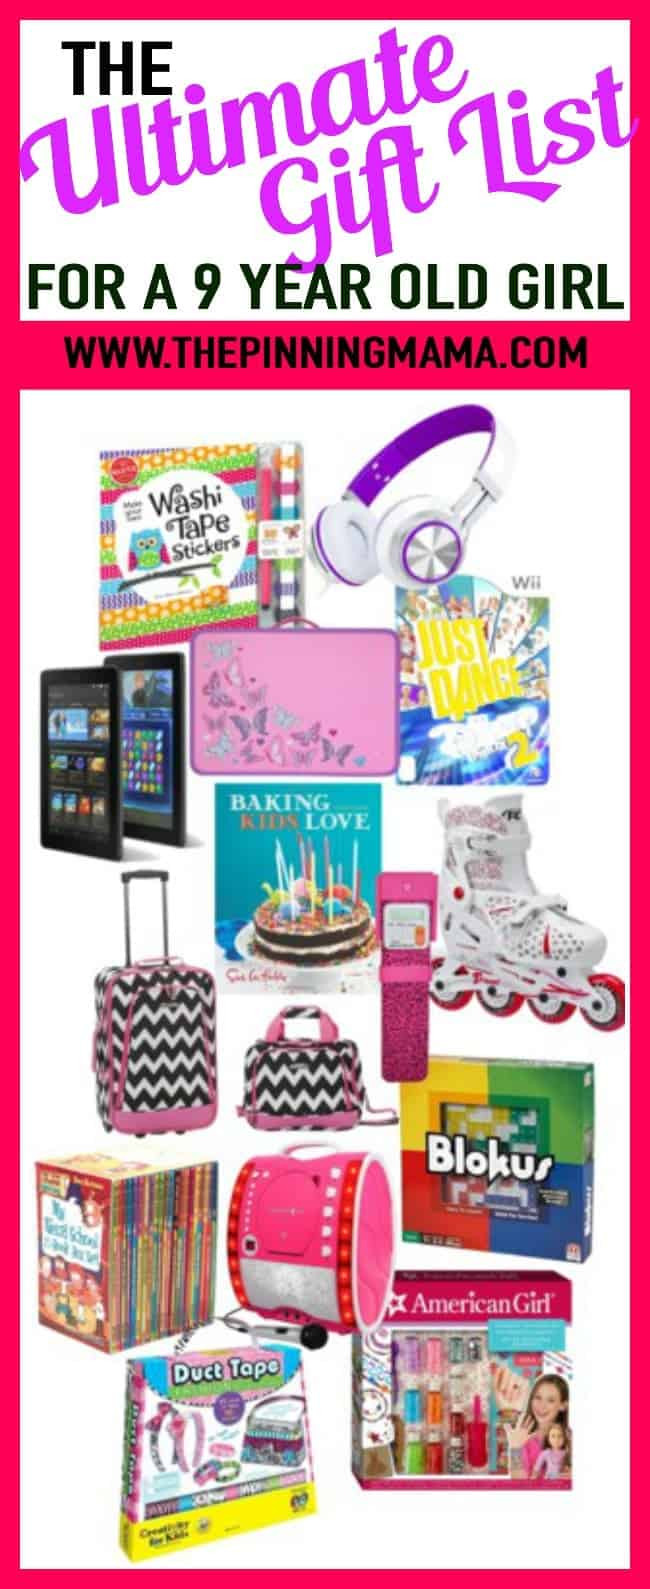 9 Yr Old Girl Christmas Gift Ideas
 The Ultimate Gift List for a 9 Year Old Girl